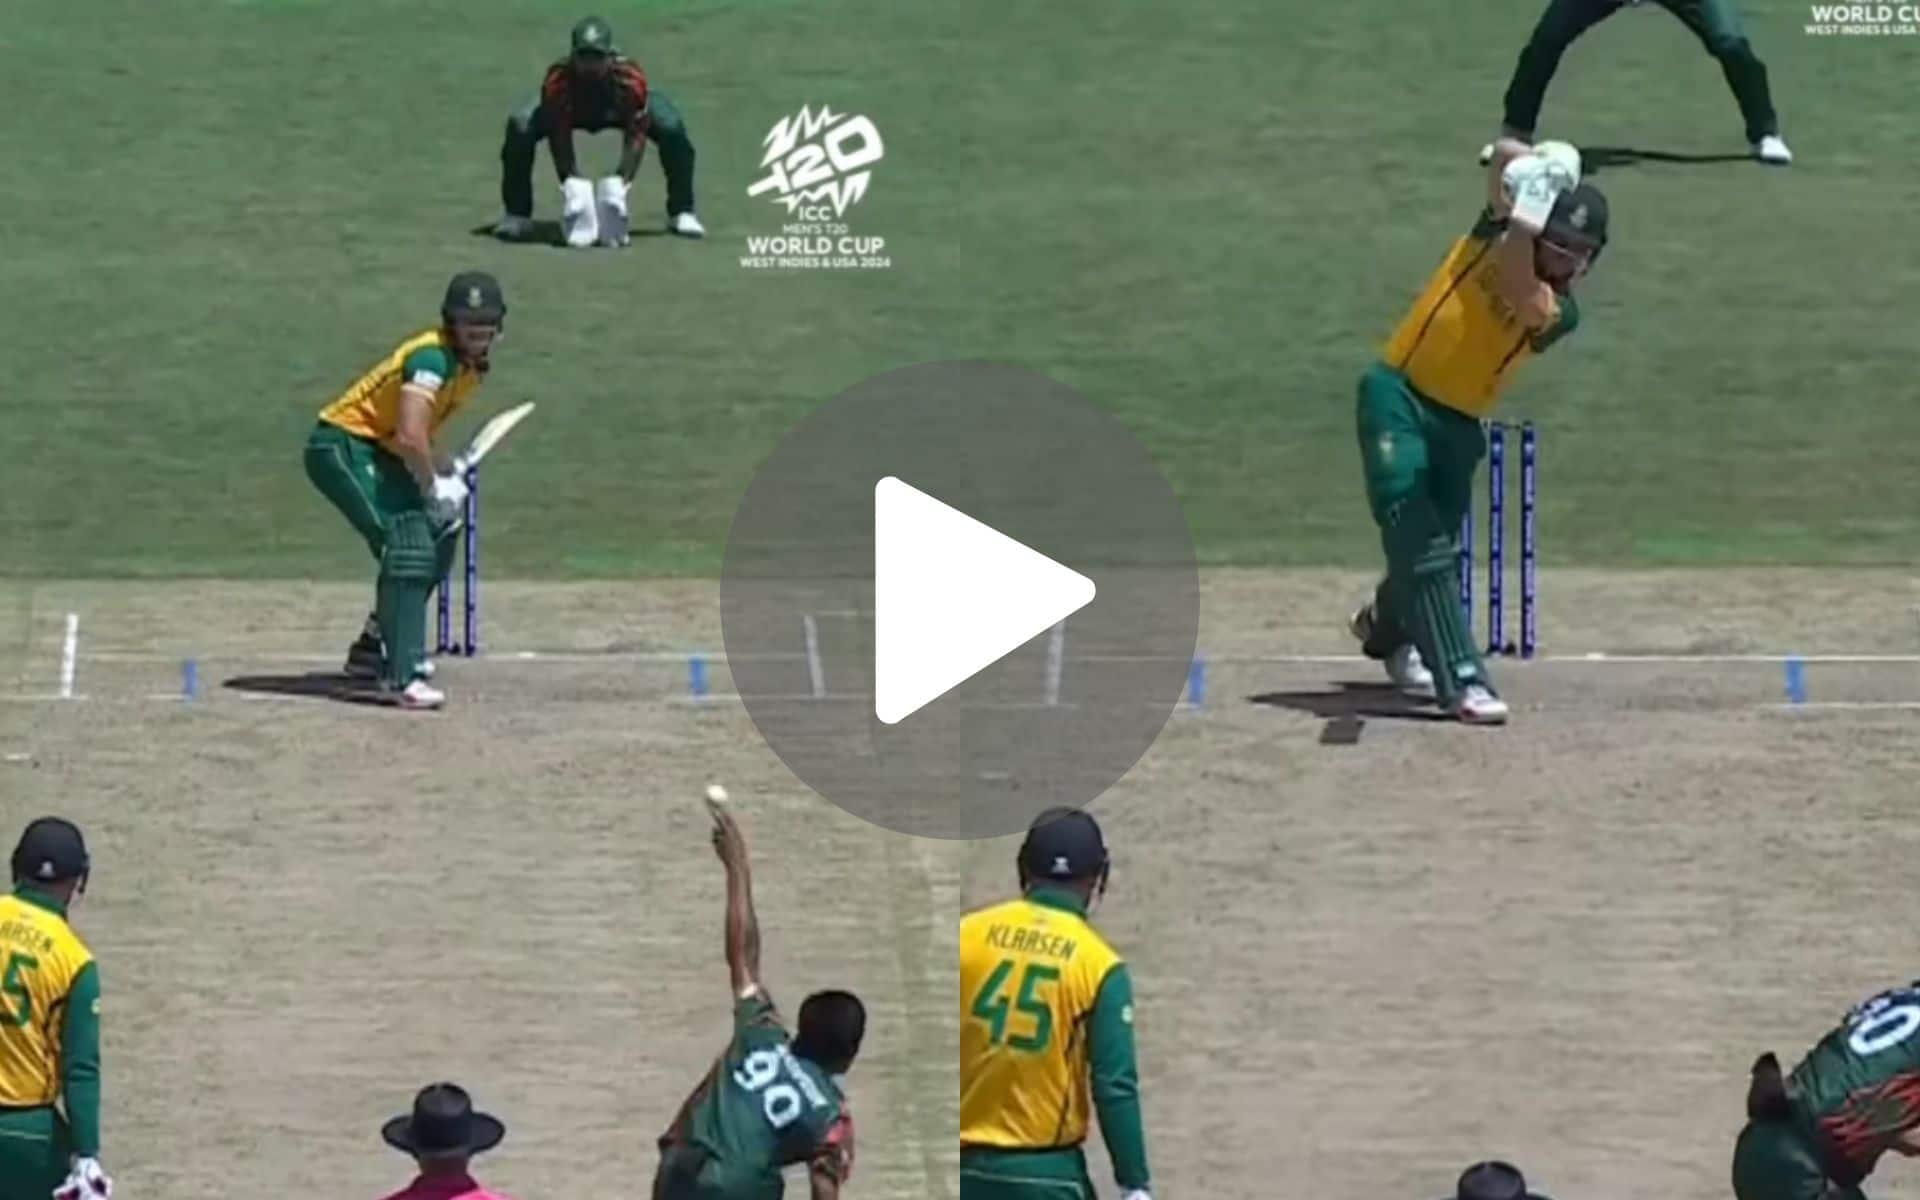 [Watch] Mustafizur 'Butchered' As Miller Challenges Kohli's Iconic MCG Six With A No-Look Hit